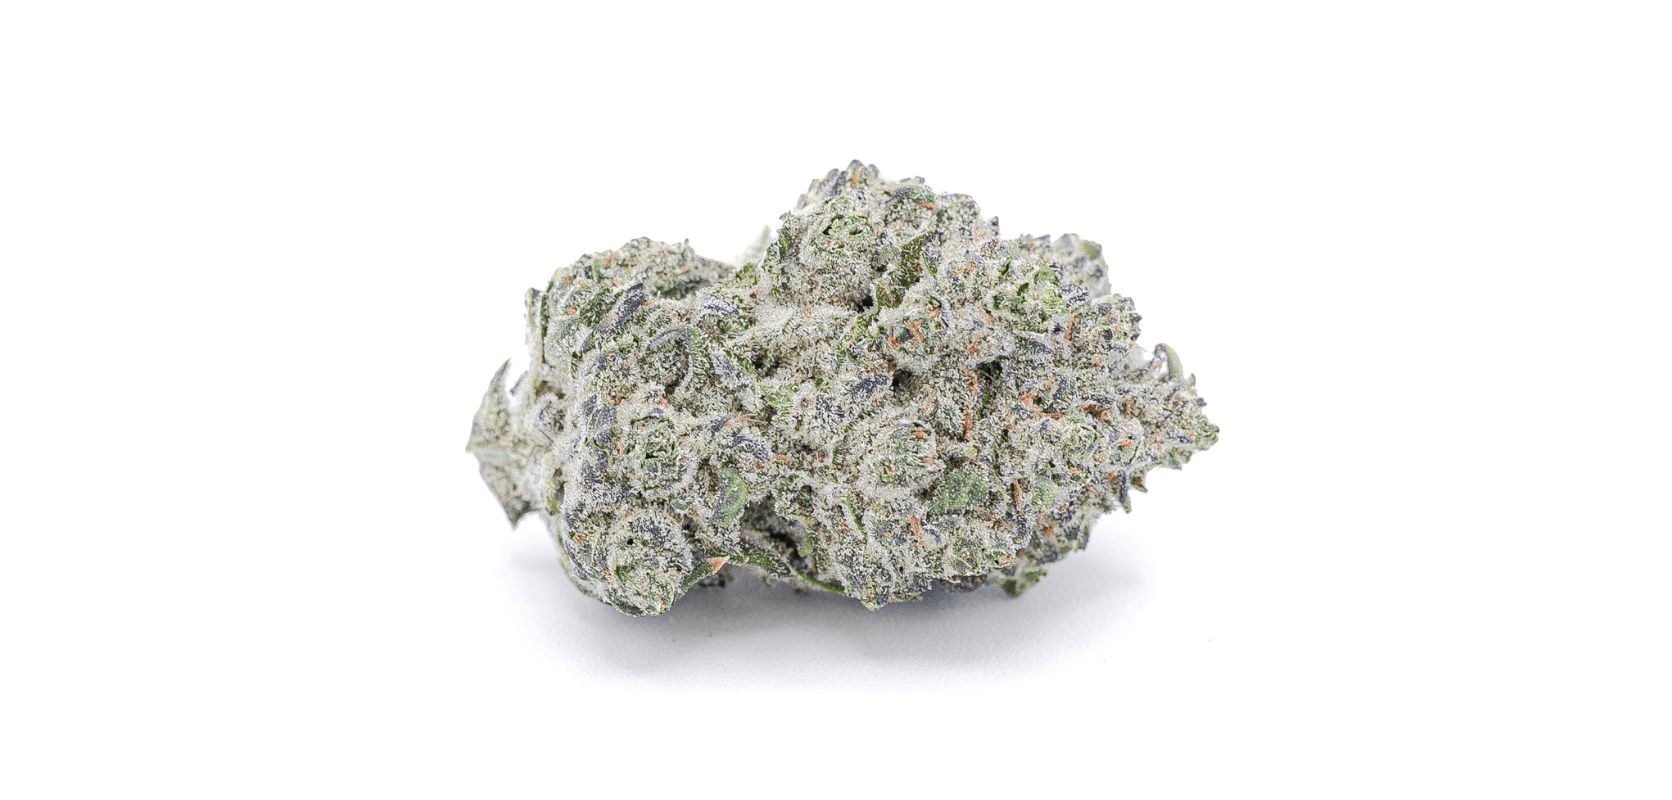 As a trusted online weed dispensary, they offer only the highest quality products with the most potent THC levels. When it comes to the Wedding Cake strain THC level, you will get only the most potent product available.